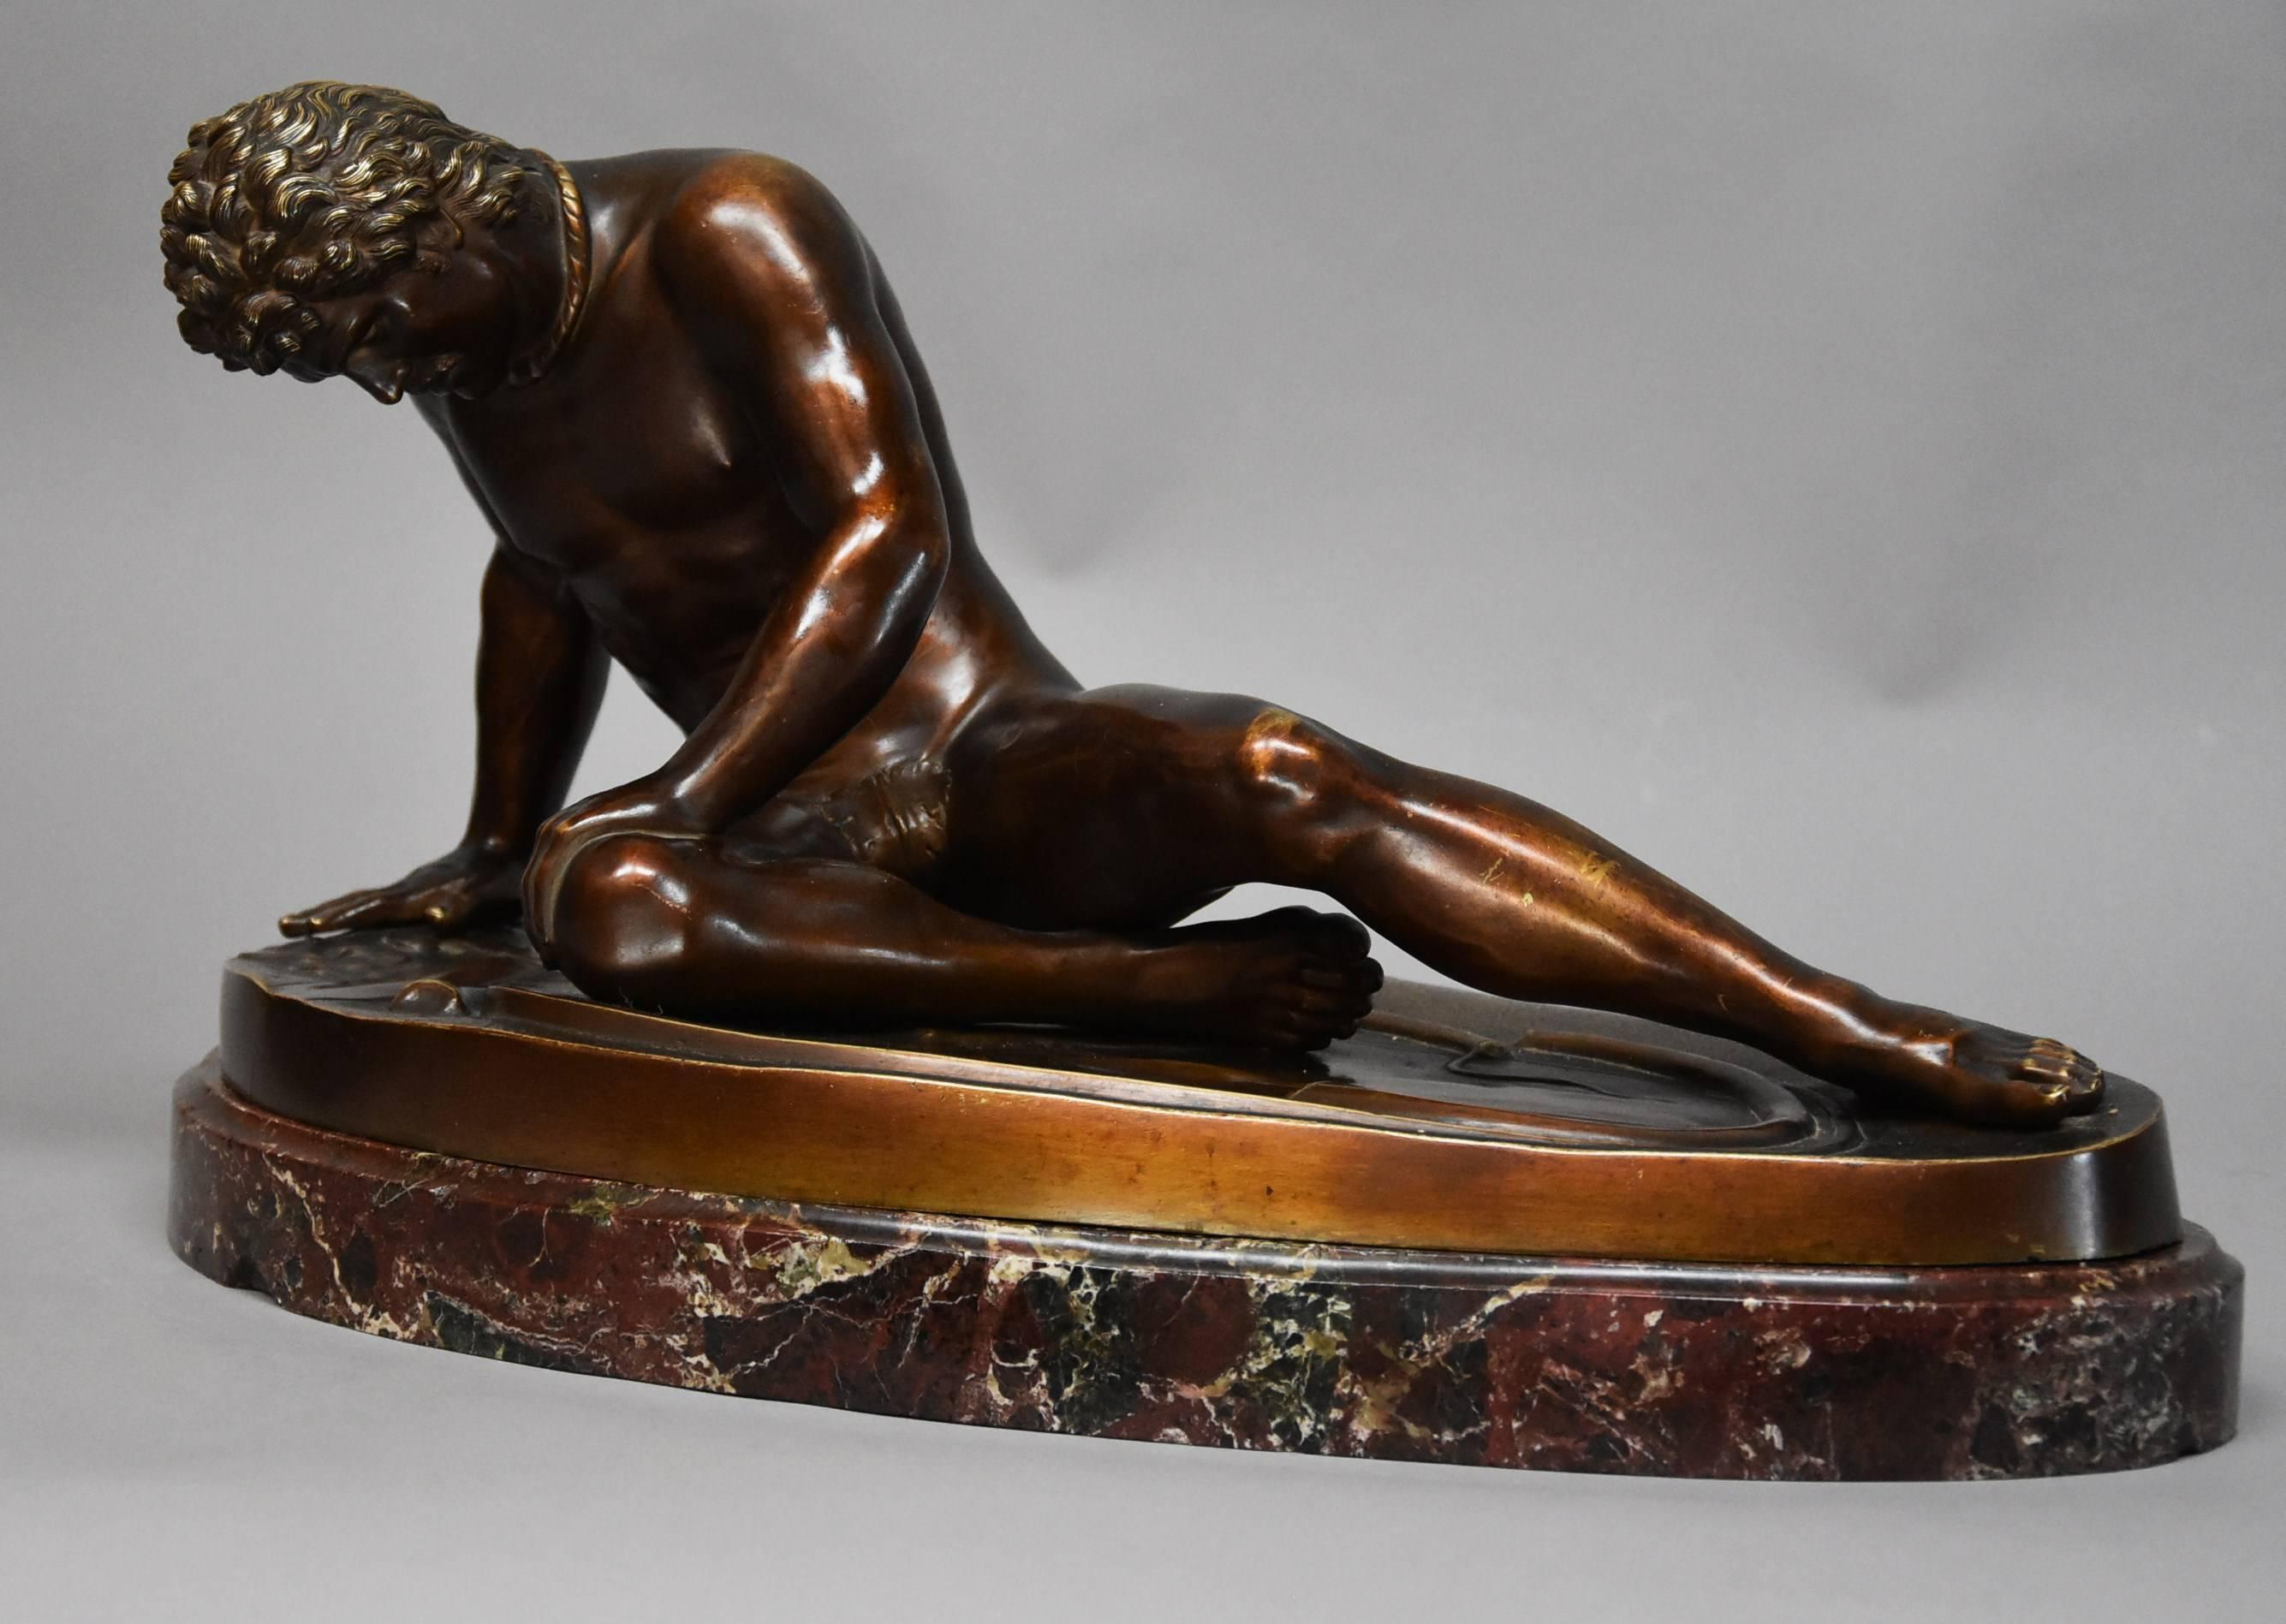 A large late 19th century Grand Tour bronze figure of 'The Dying Gaul' supported on an original Breccia rossa marble oval base, after the antique, possibly Italian.

The dying gaul or dying gladiator is depicted in his final moments next to his